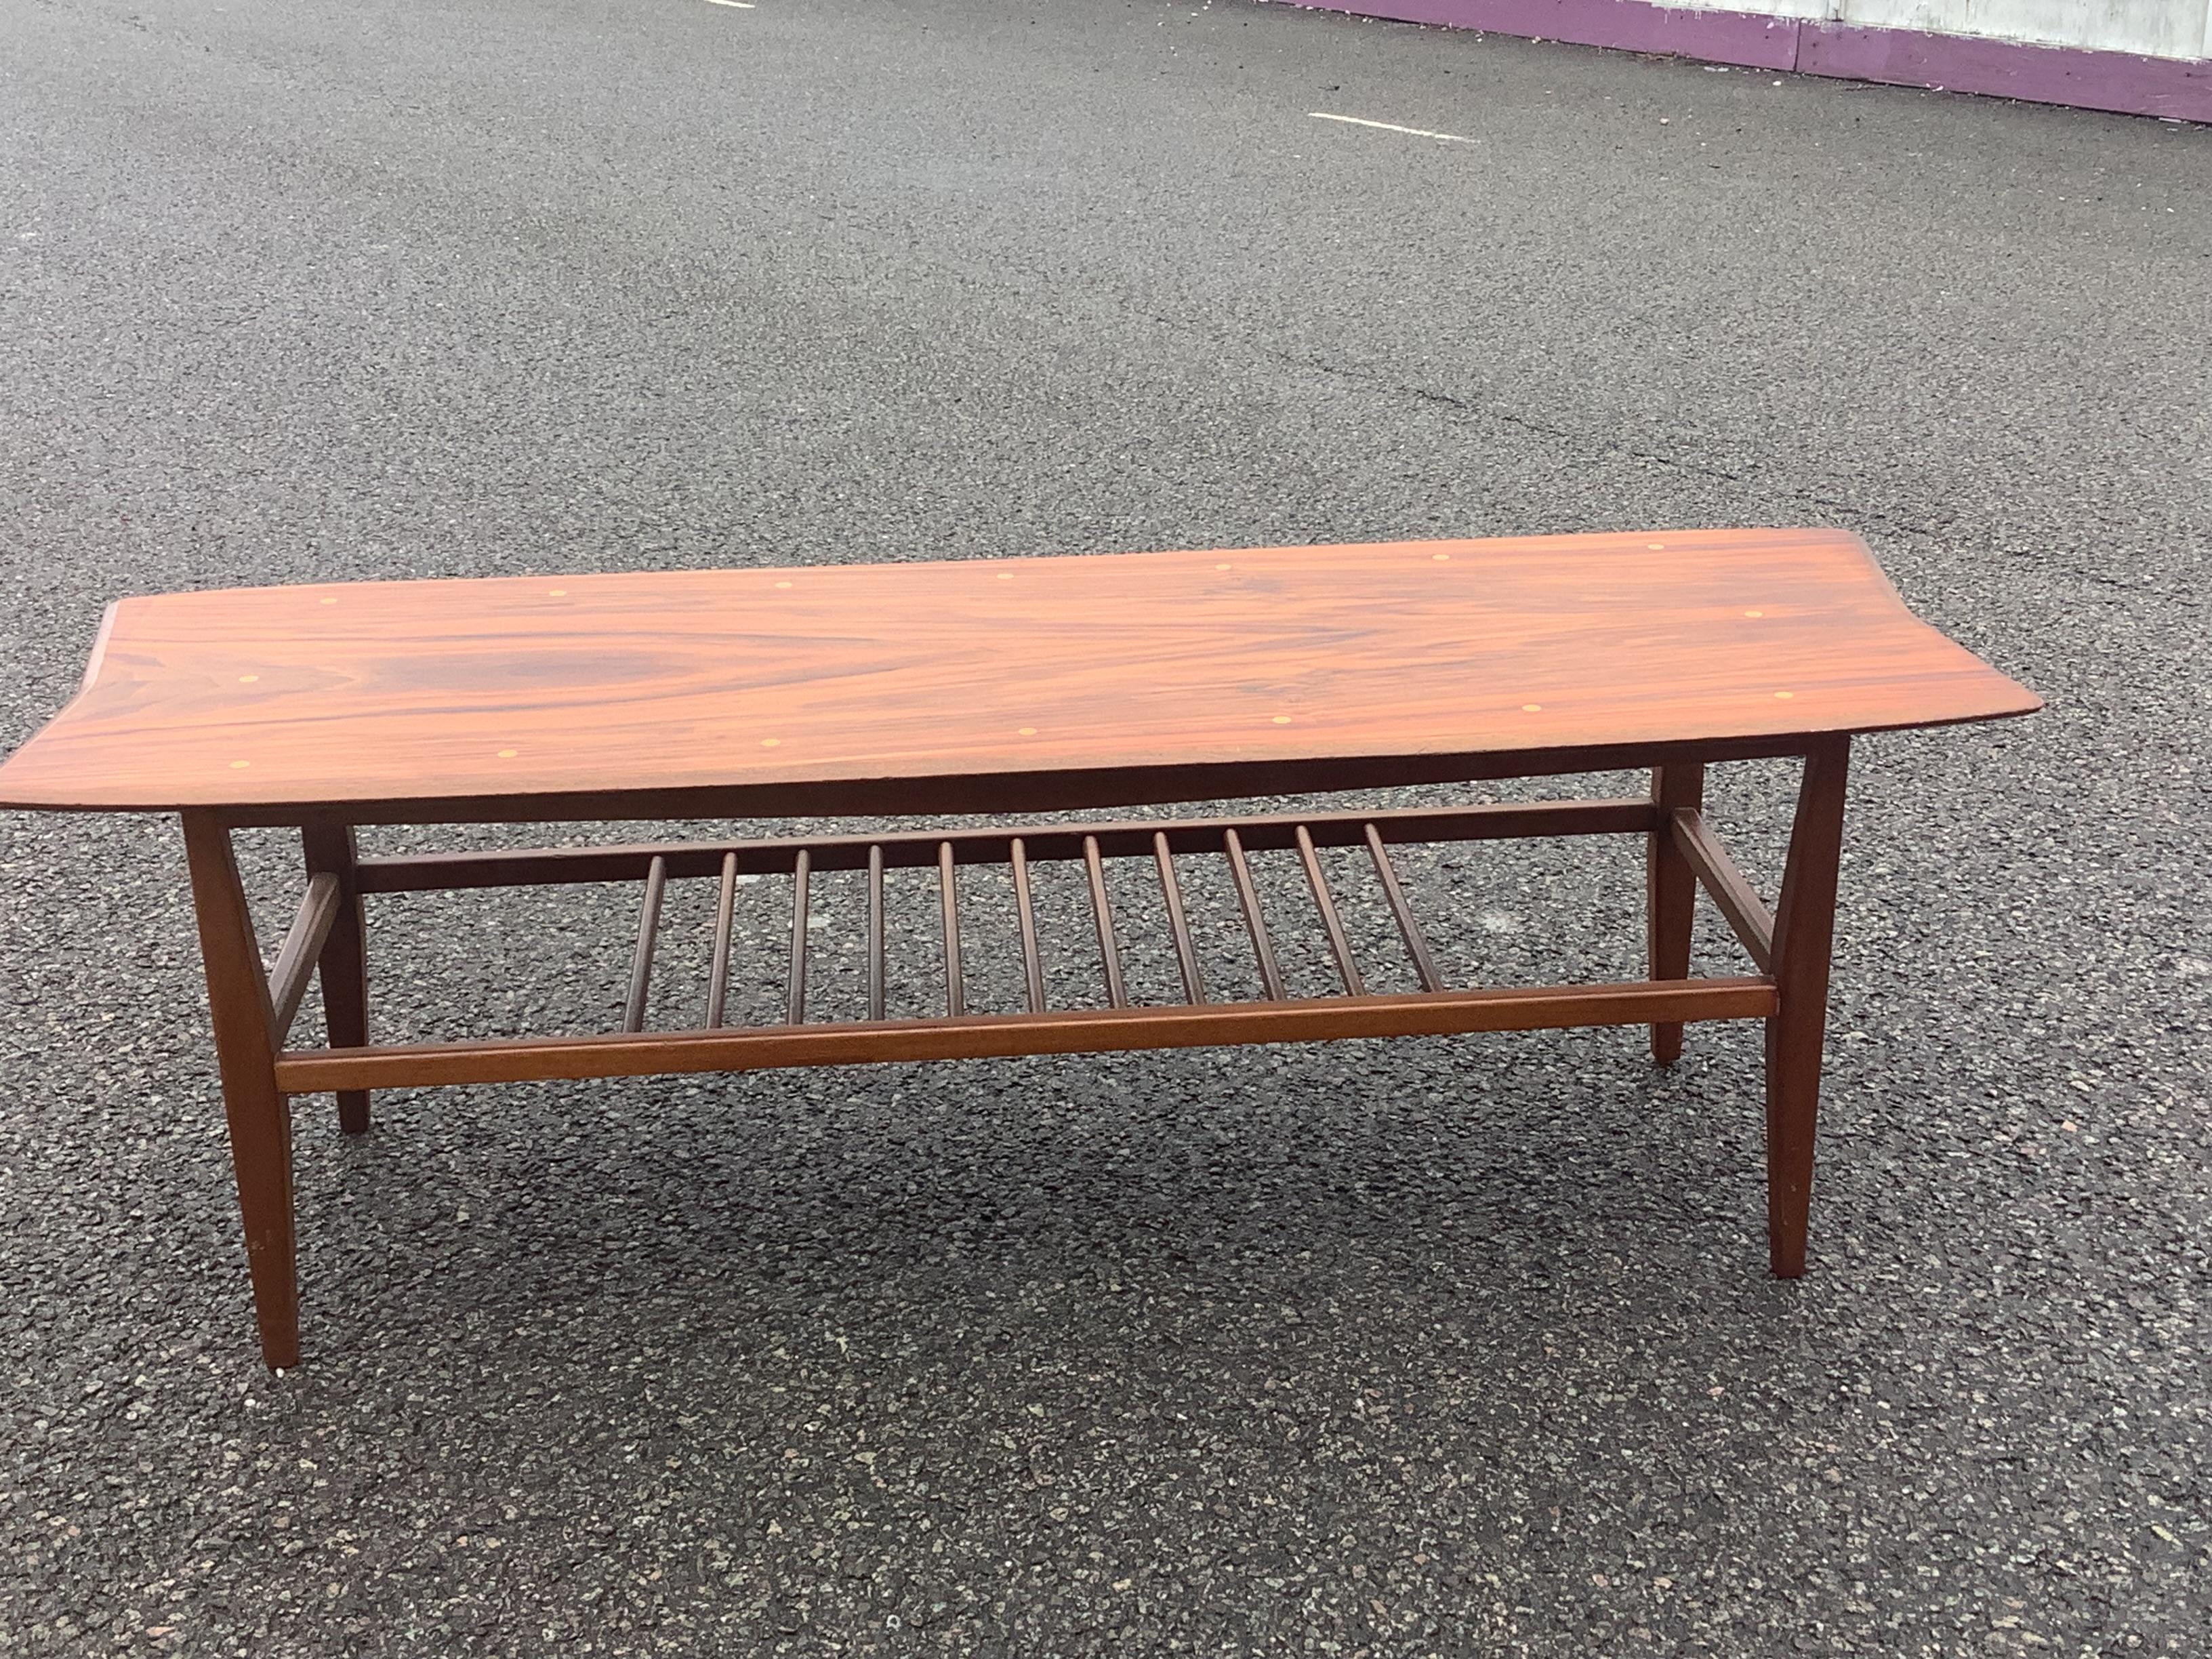 This is a charming original rare coffee table is made by the UK brand Everest. It was normally retailed through Heals. 


walnut coffee table with sycamore detailing Featuring an organic shaped top with a chamfered edge in a richly figured and